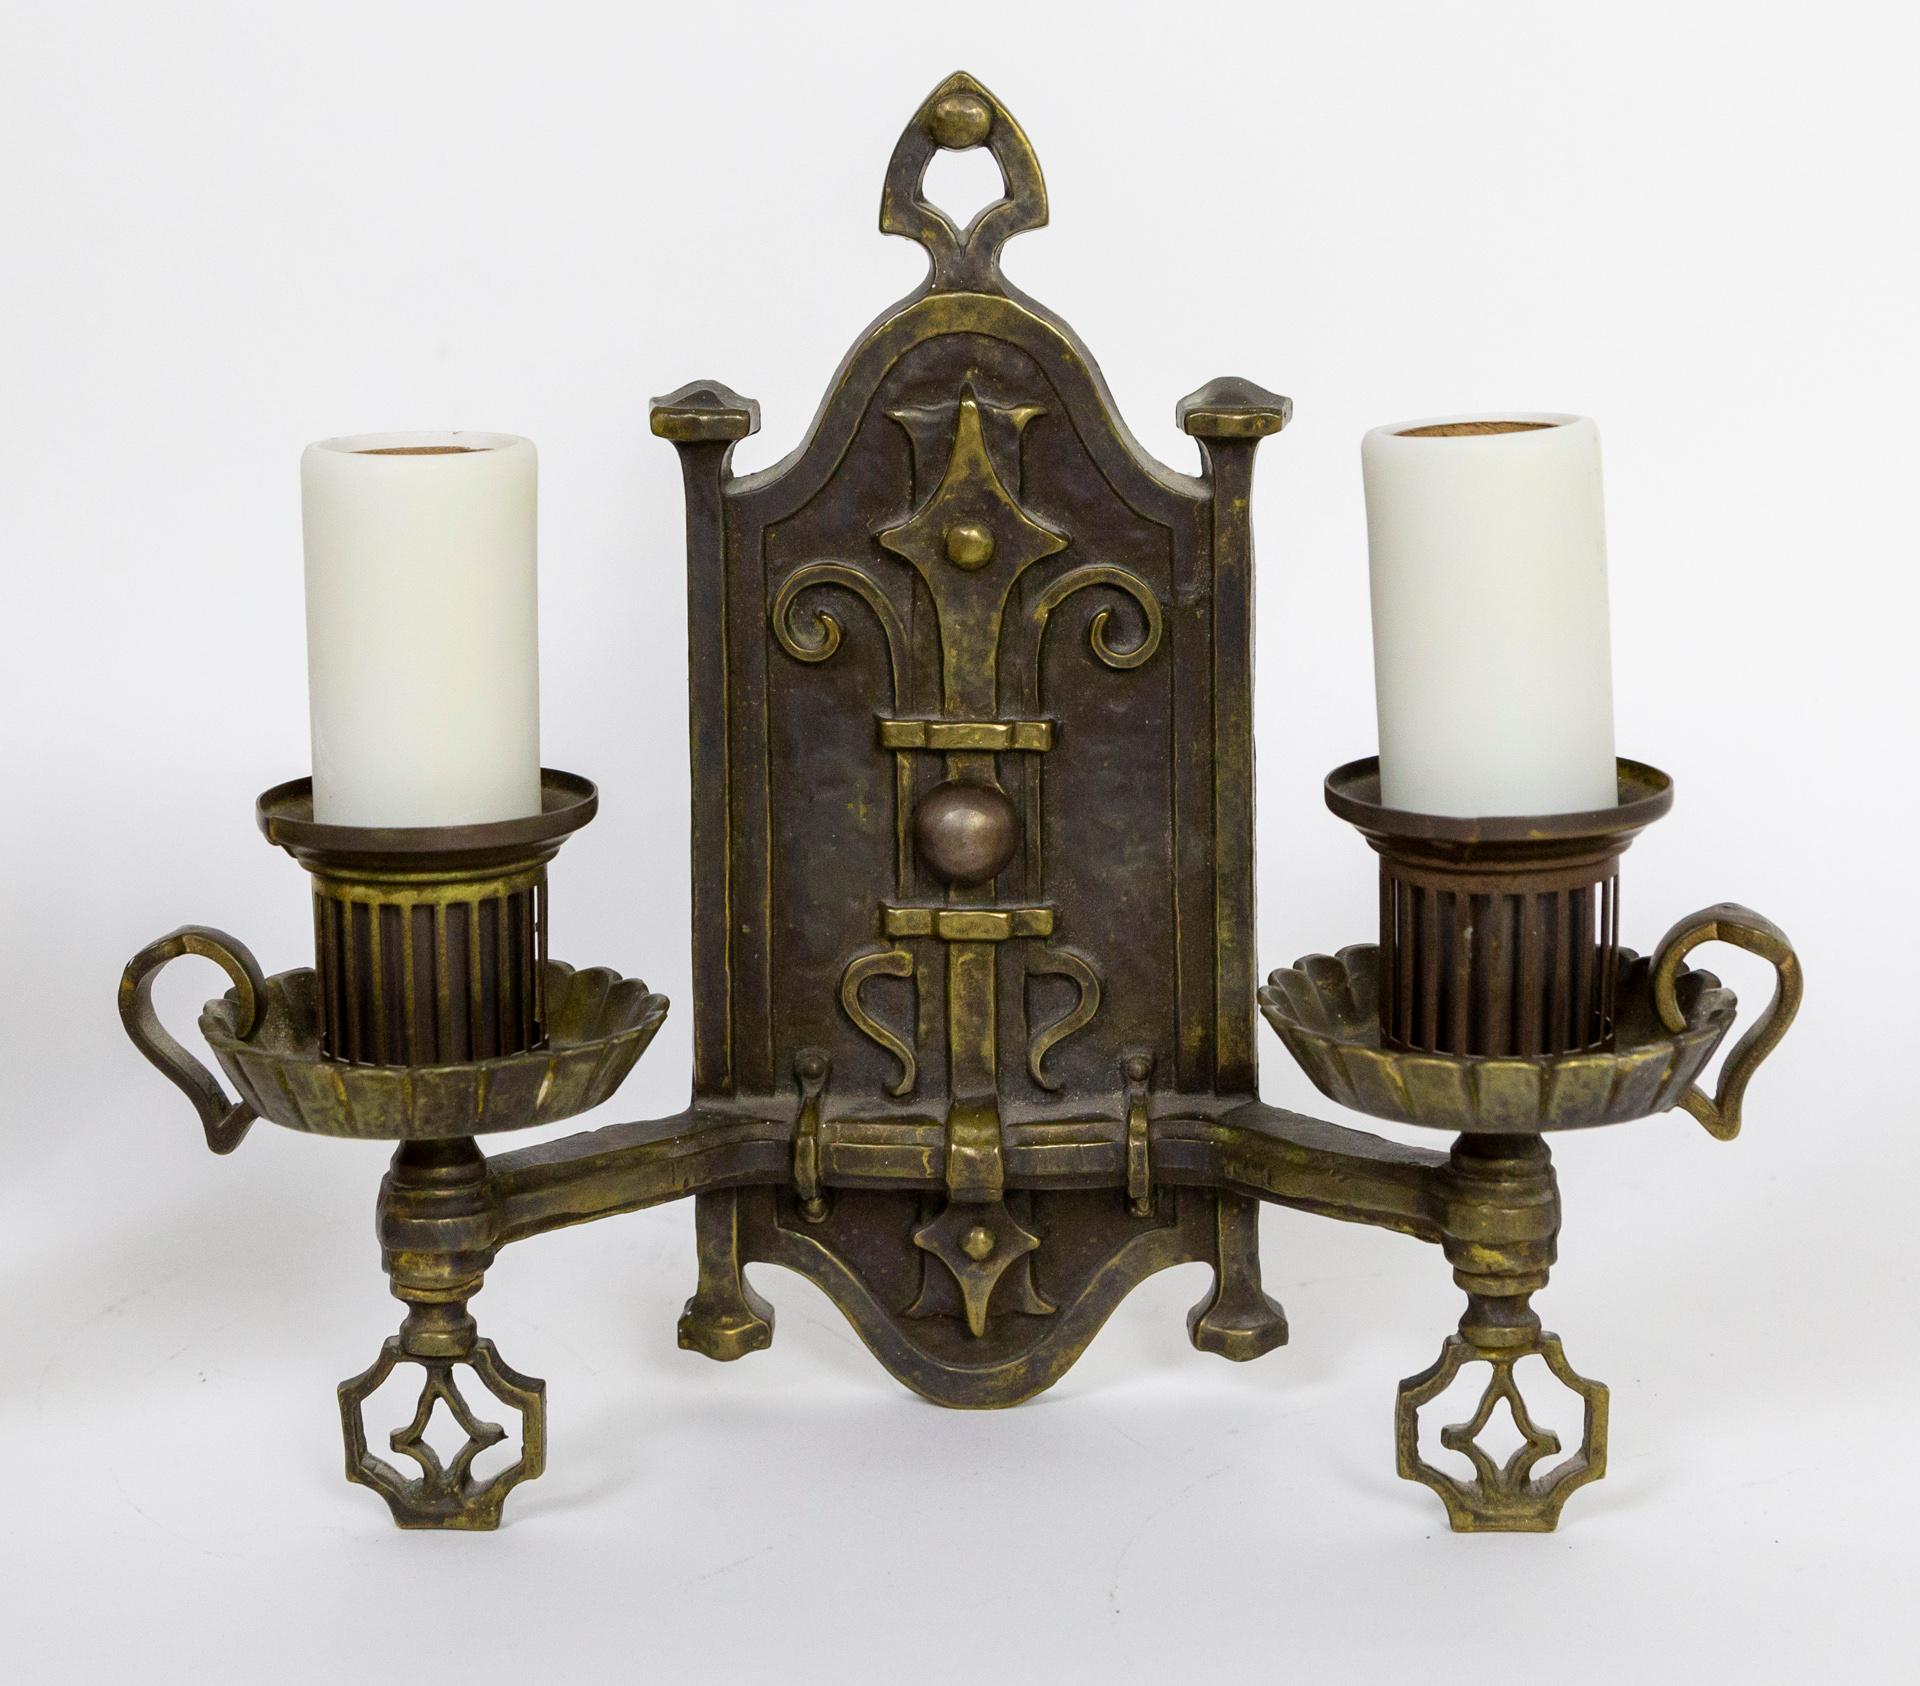 Spanish Colonial Spanish Revival Max Schaffer Co. Wrought Iron Sconces 'Pair'